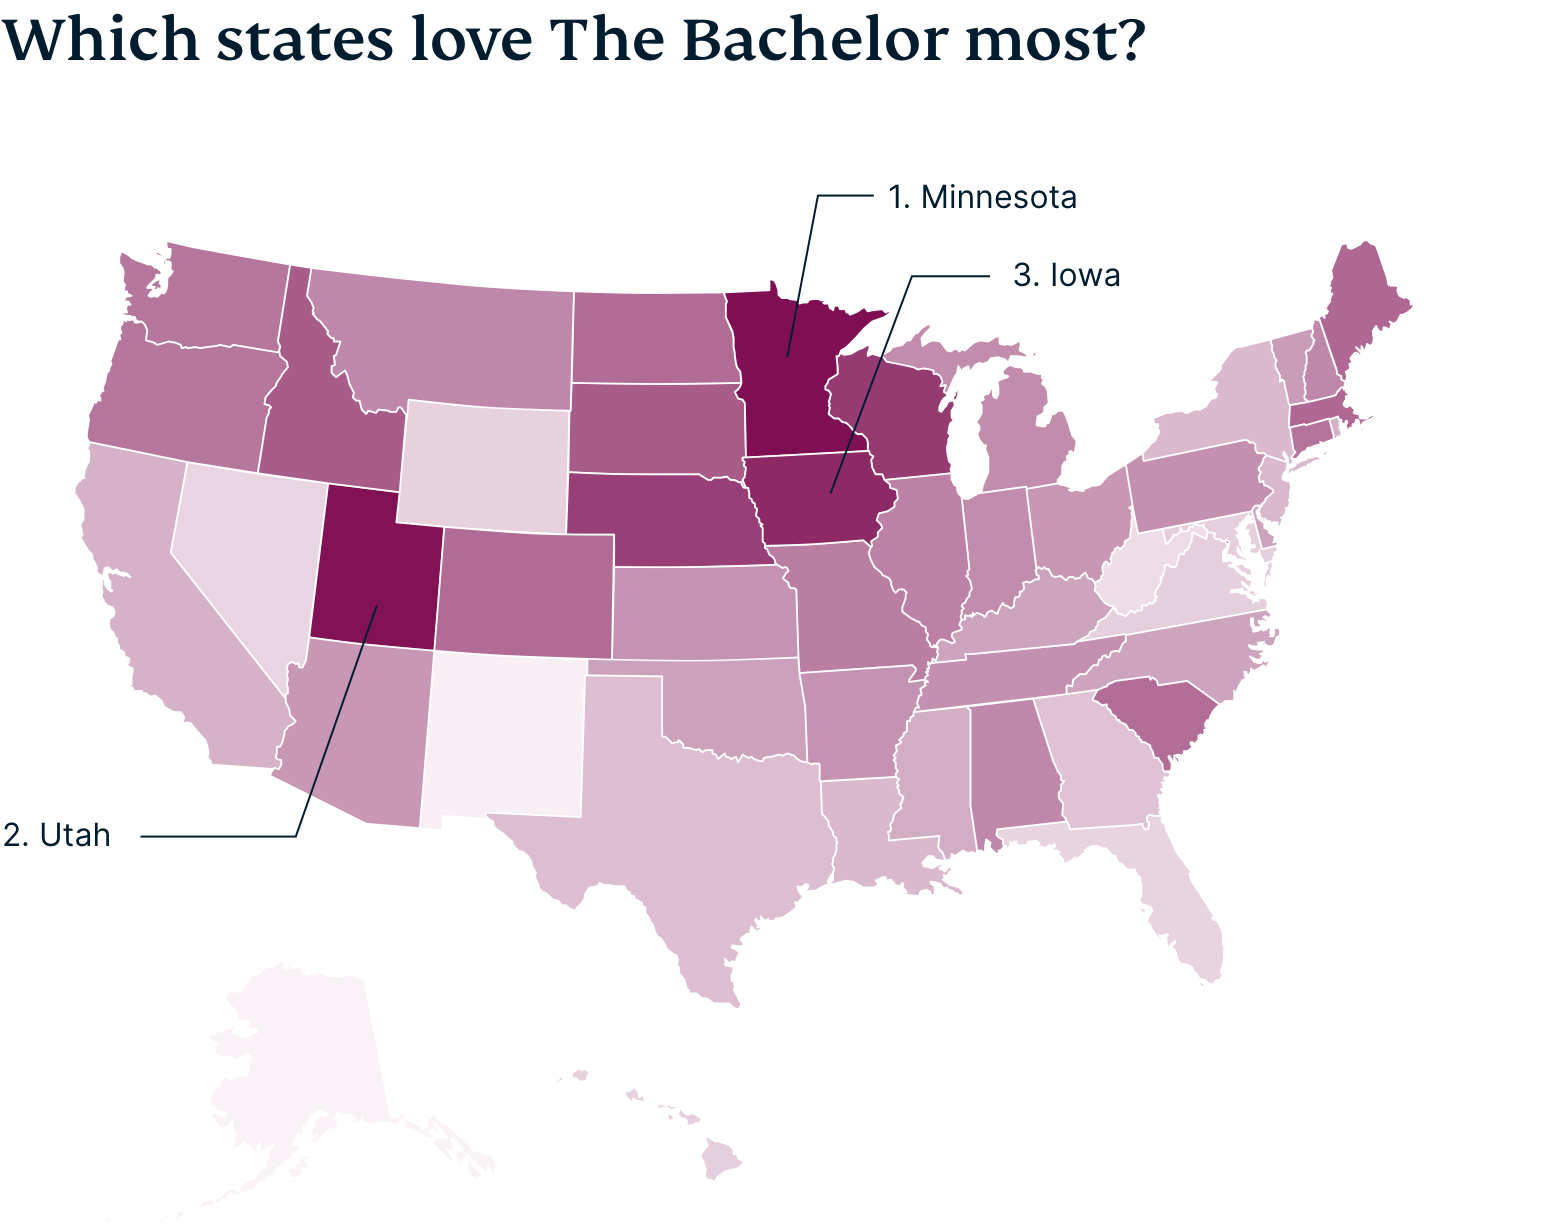 Heat map of U.S. states with most Bachelor fans.